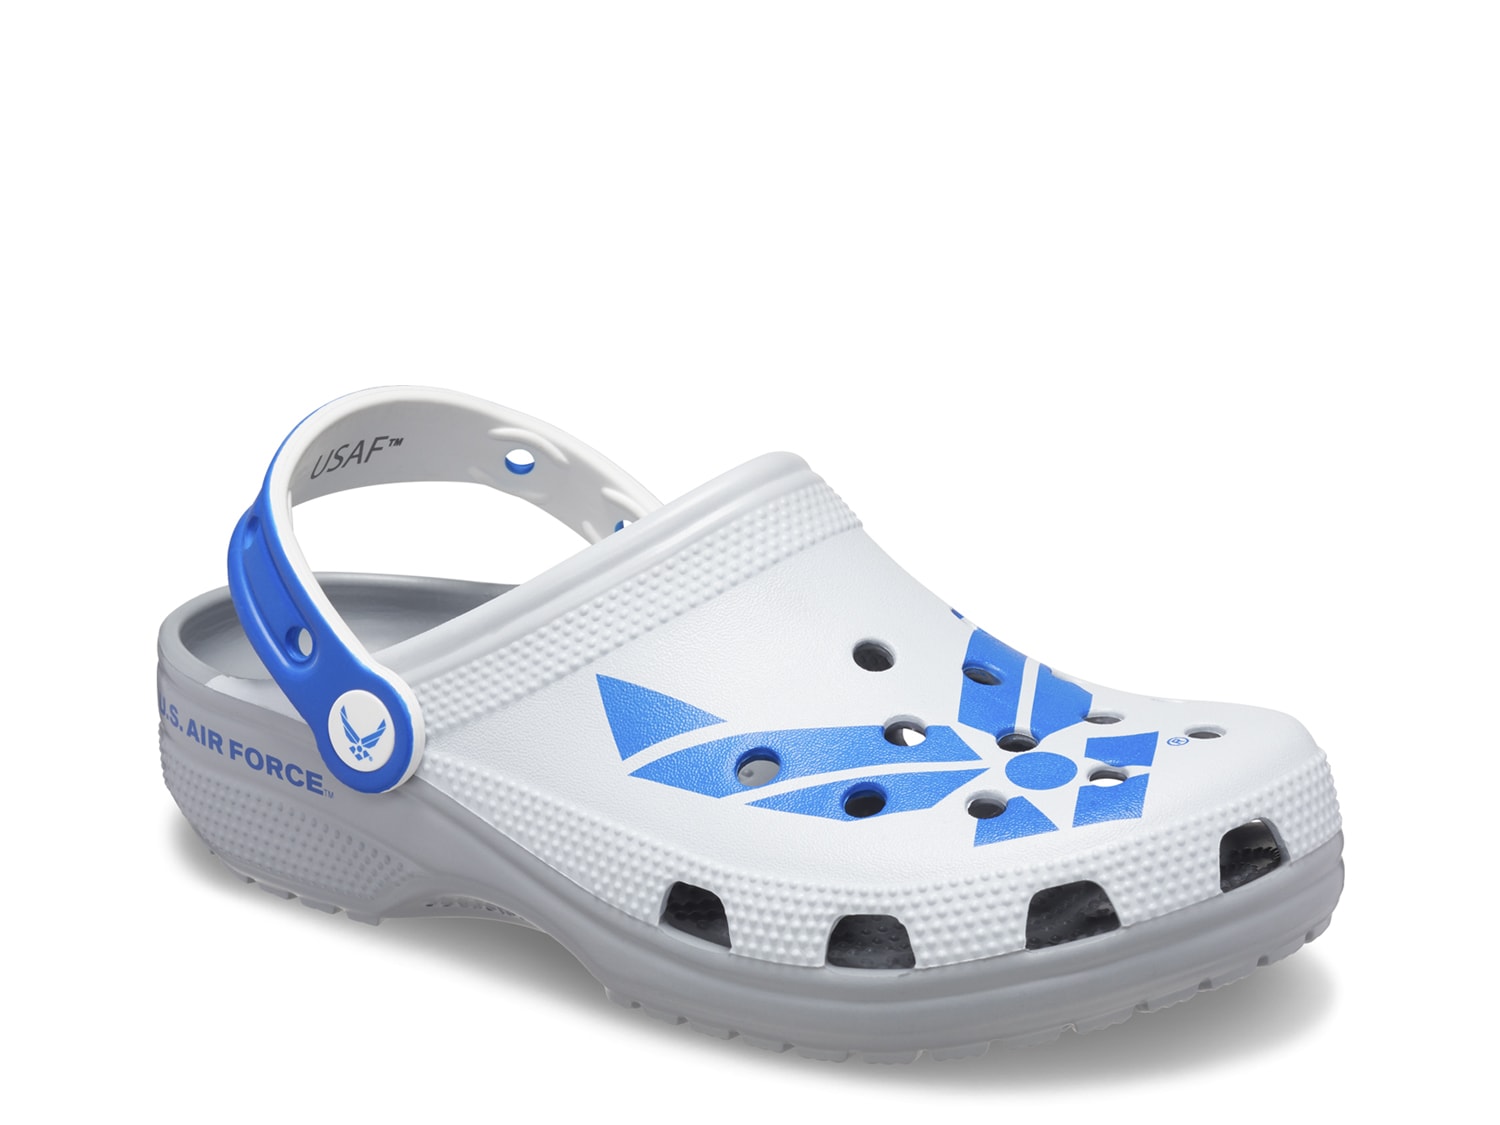 Crocs Classic US Air Force Clog - Free Shipping | DSW